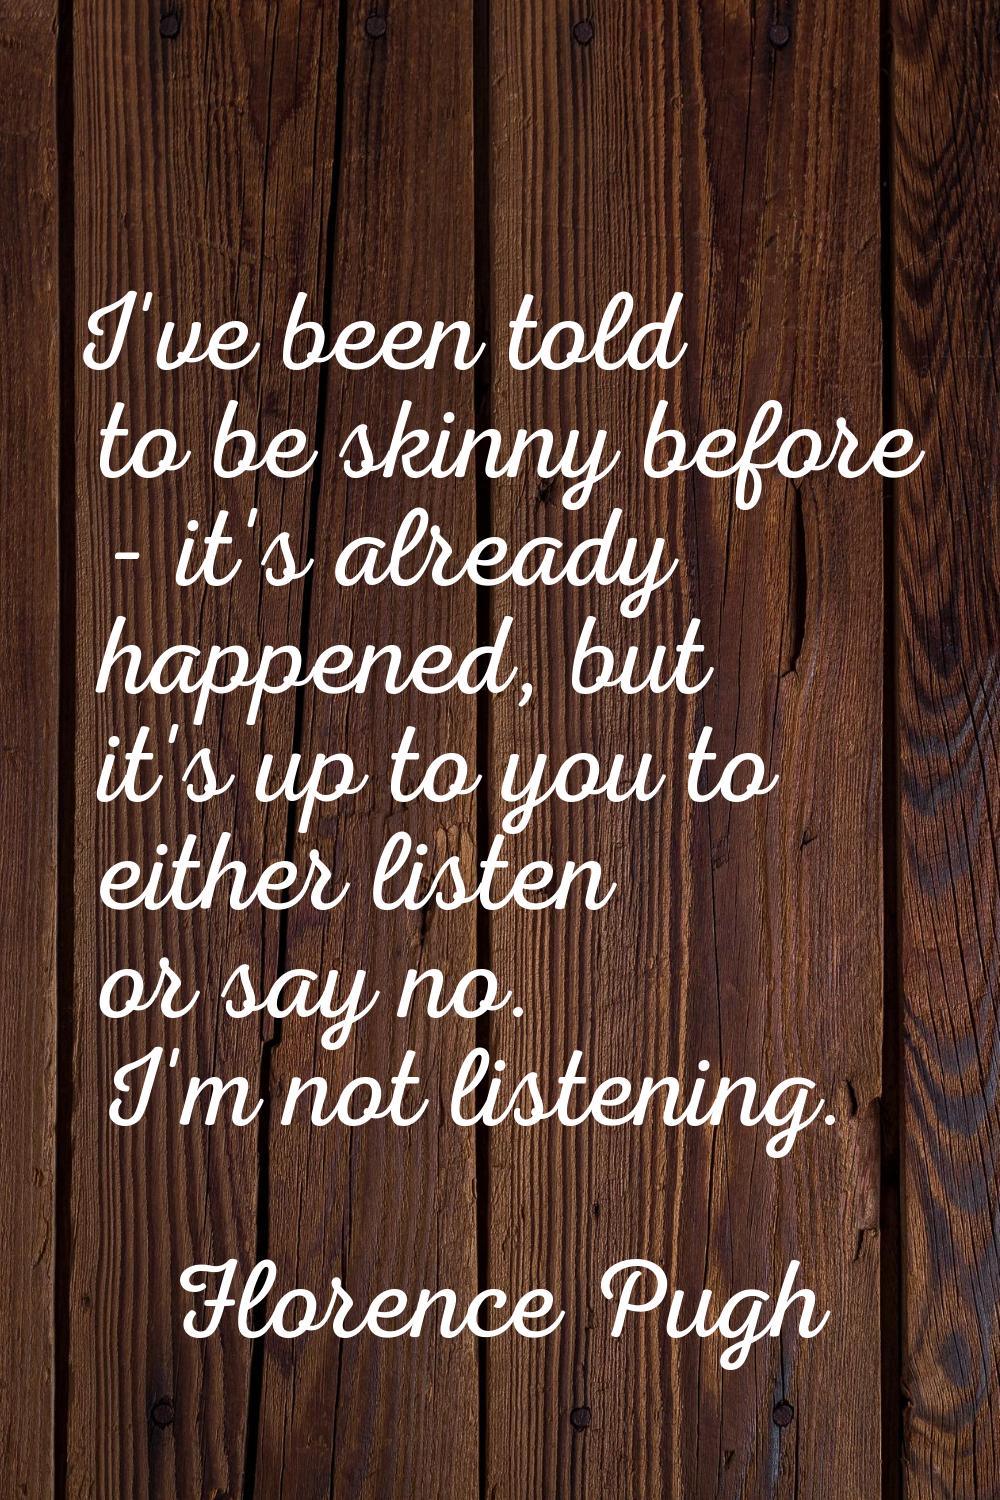 I've been told to be skinny before - it's already happened, but it's up to you to either listen or 